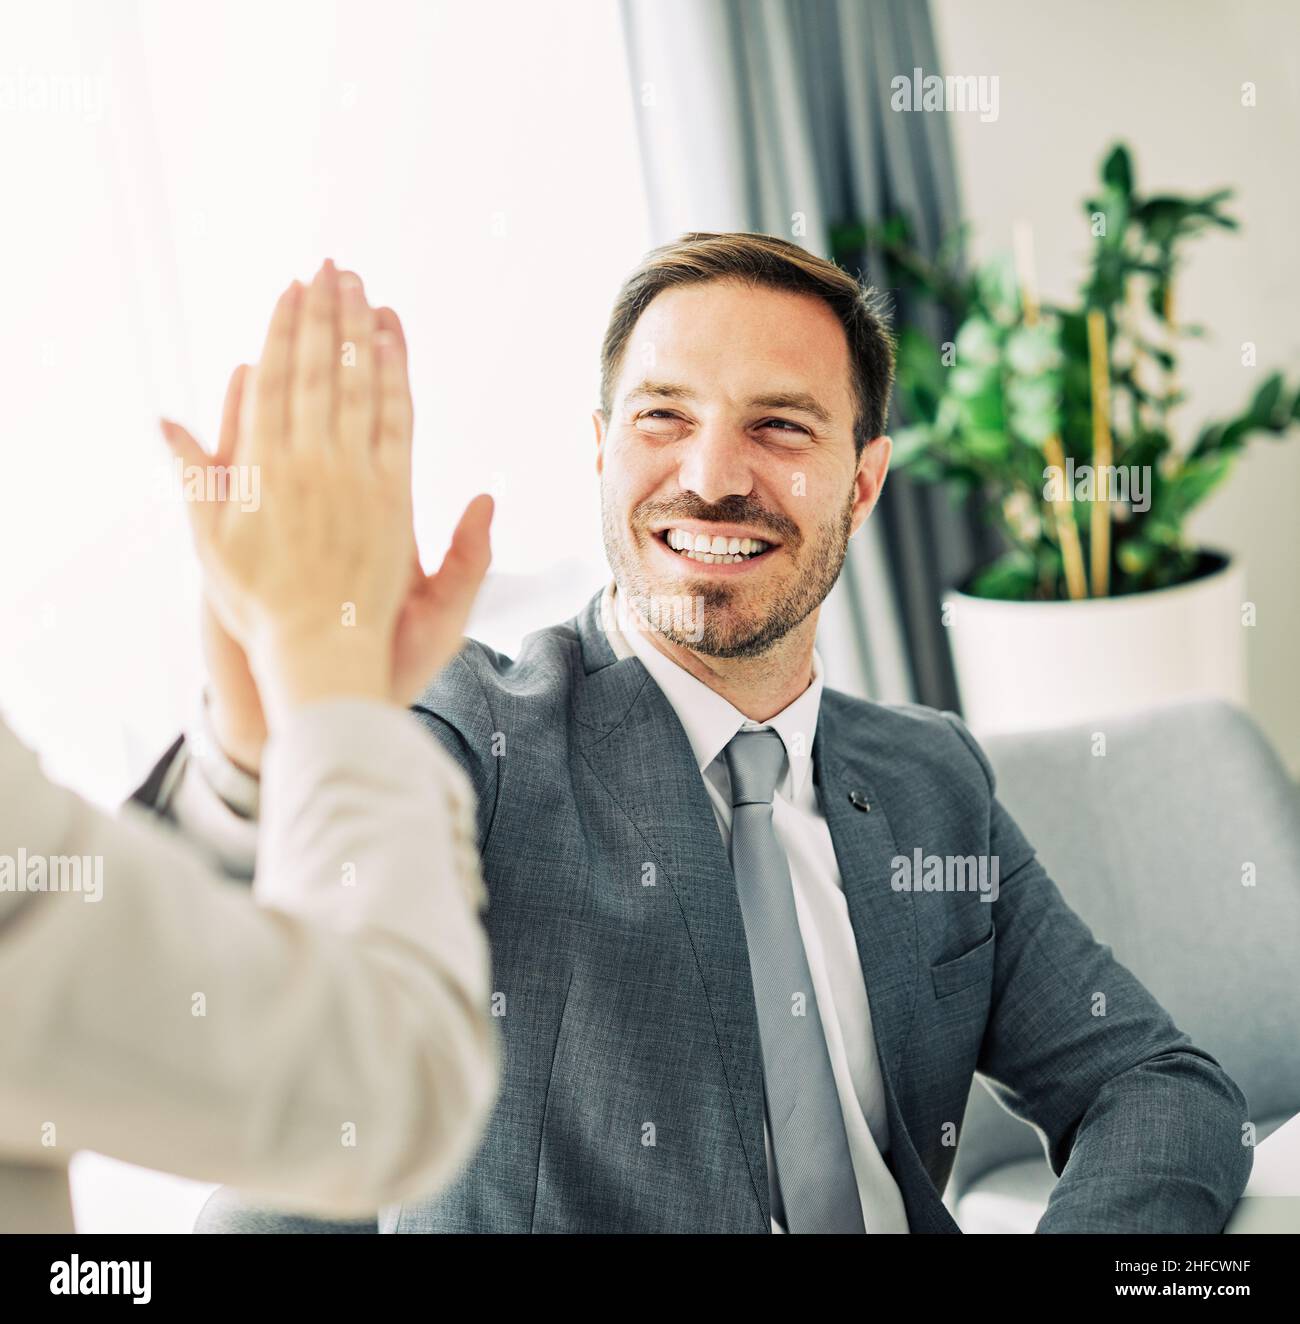 businessman man male success young business team high five support unity celebrating give me five office Stock Photo